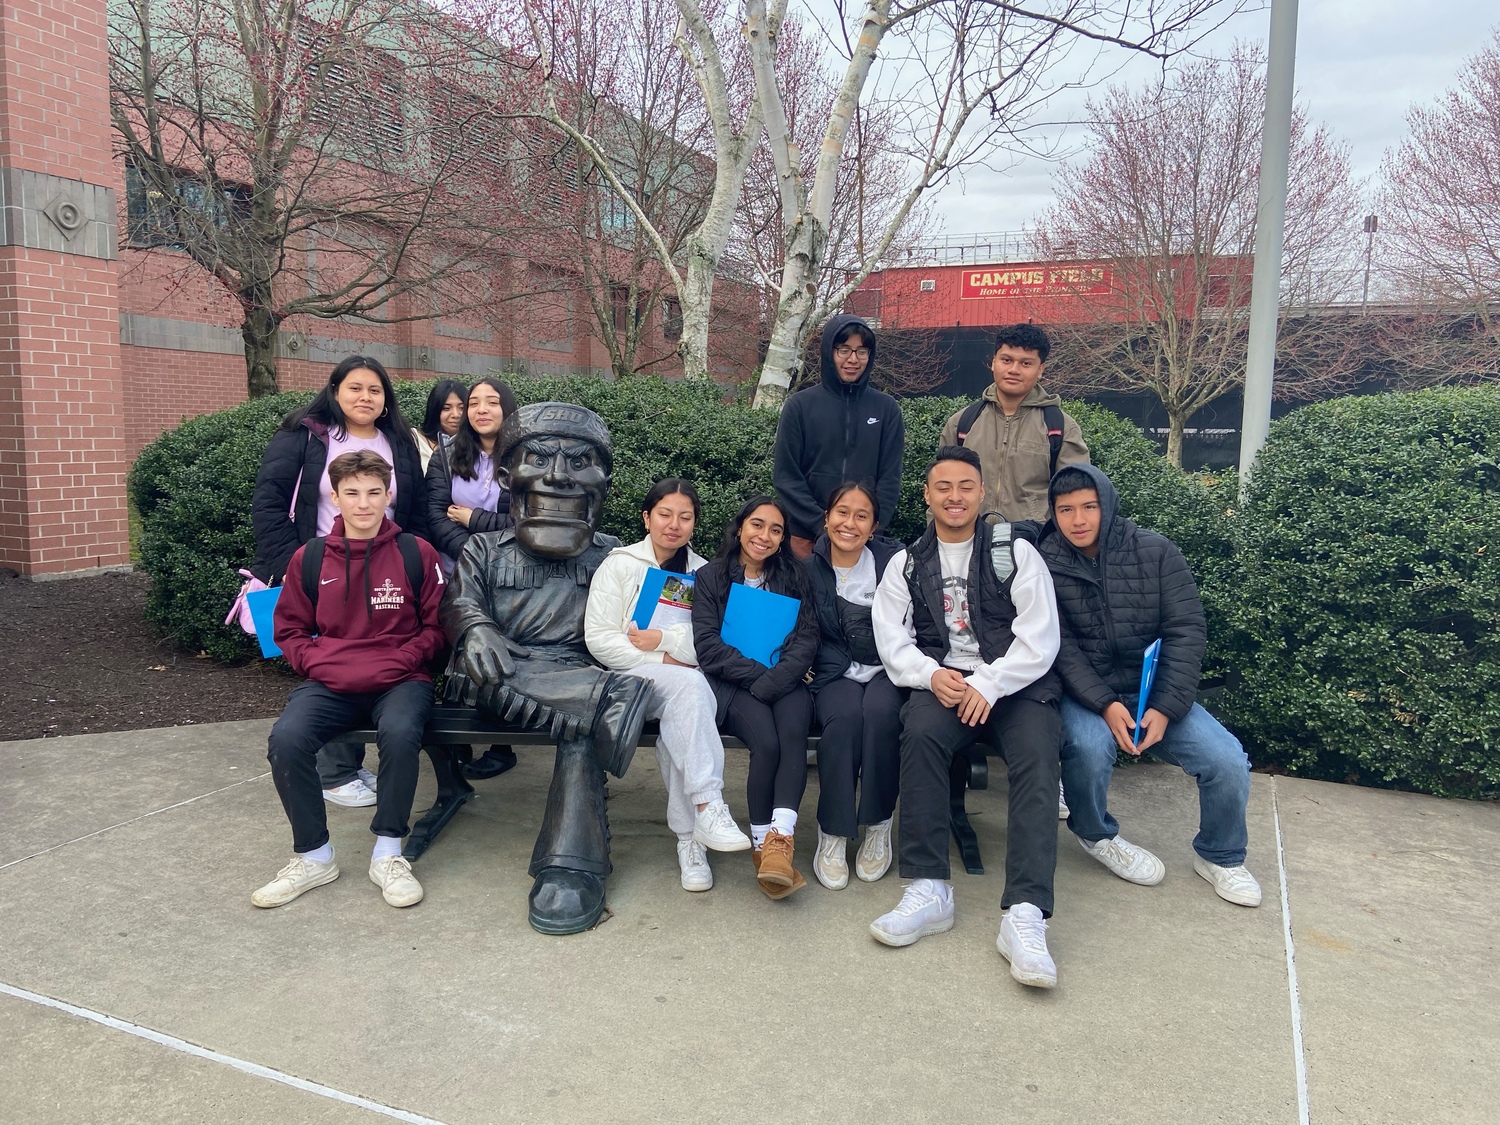 Southampton High School juniors recently had an opportunity to visit Sacred Heart University and Southern Connecticut University. During the college visits, organized by the high school’s counseling department, the students learned about admission requirements and majors of study and toured each campus. COURTESY SOUTHAMPTON SCHOOL DISTRICT